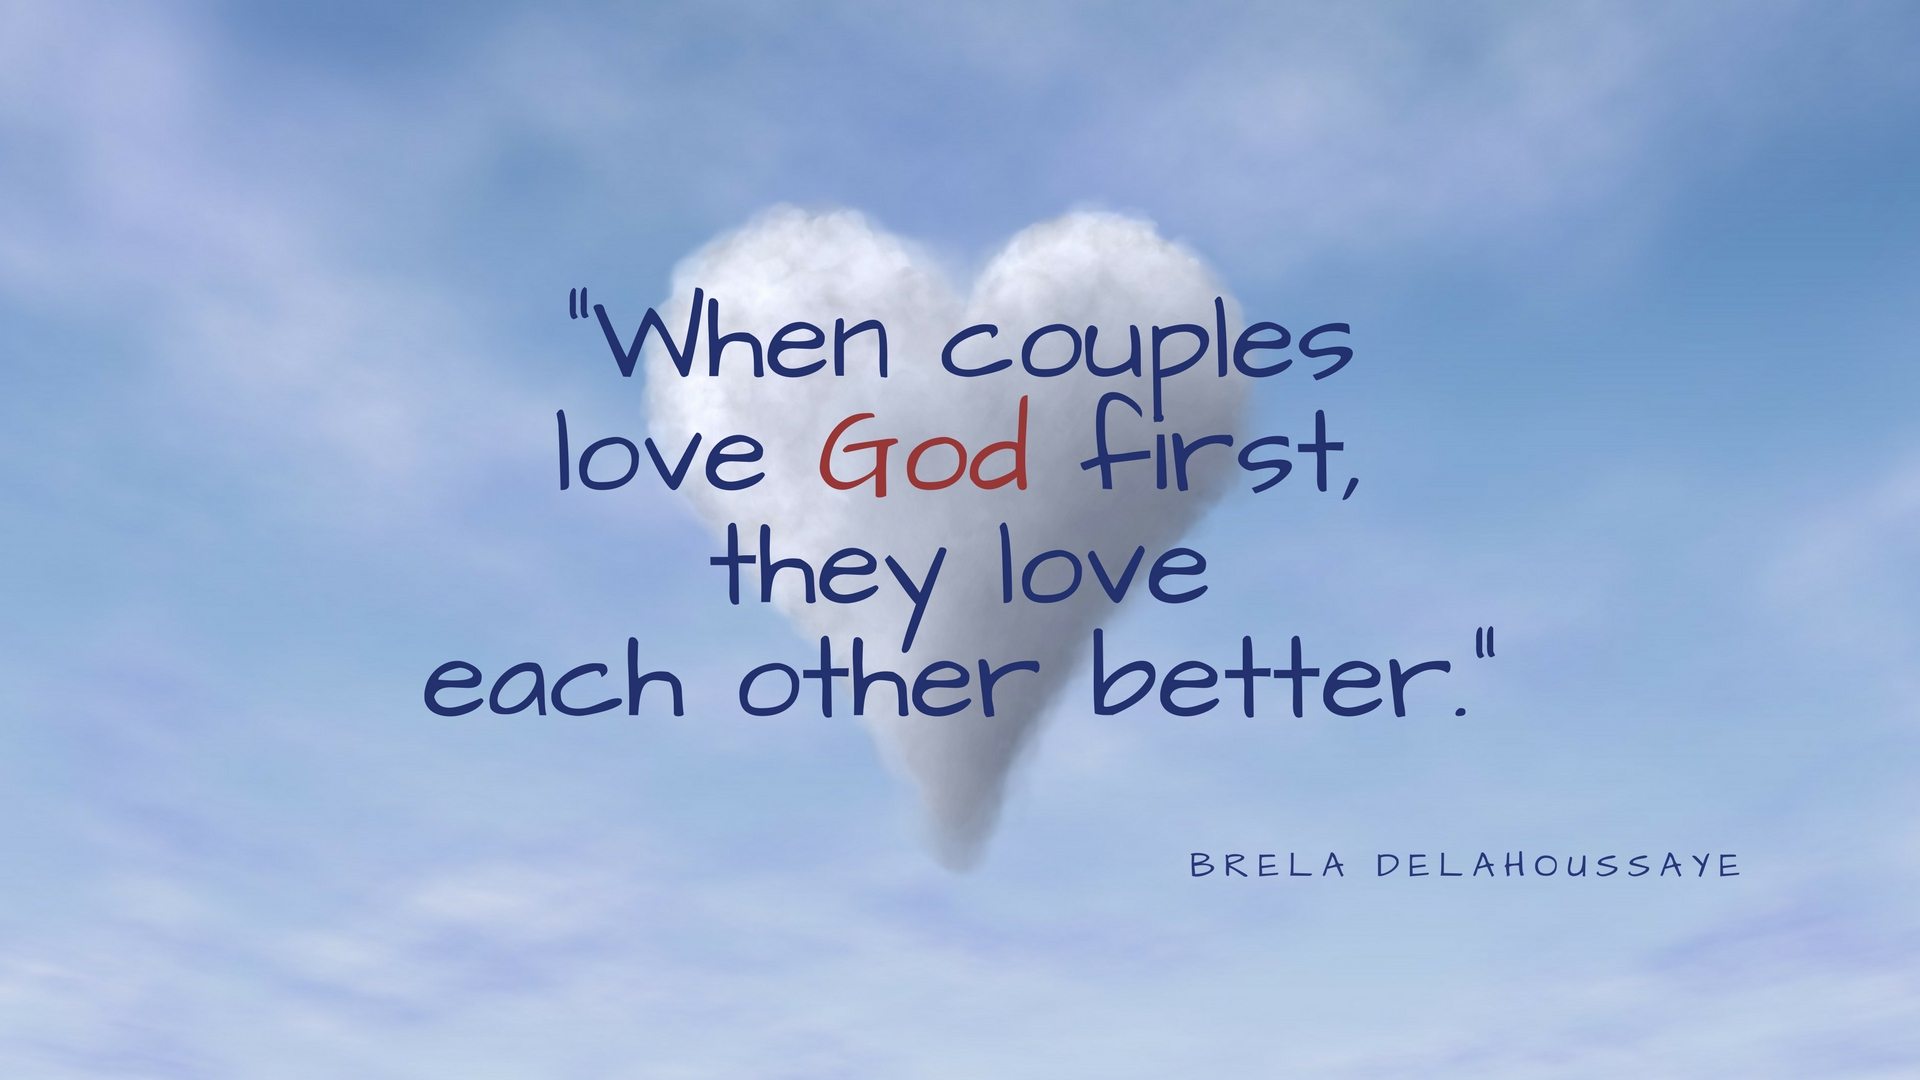 When couples love God great marriage tips - Pixabay - canva